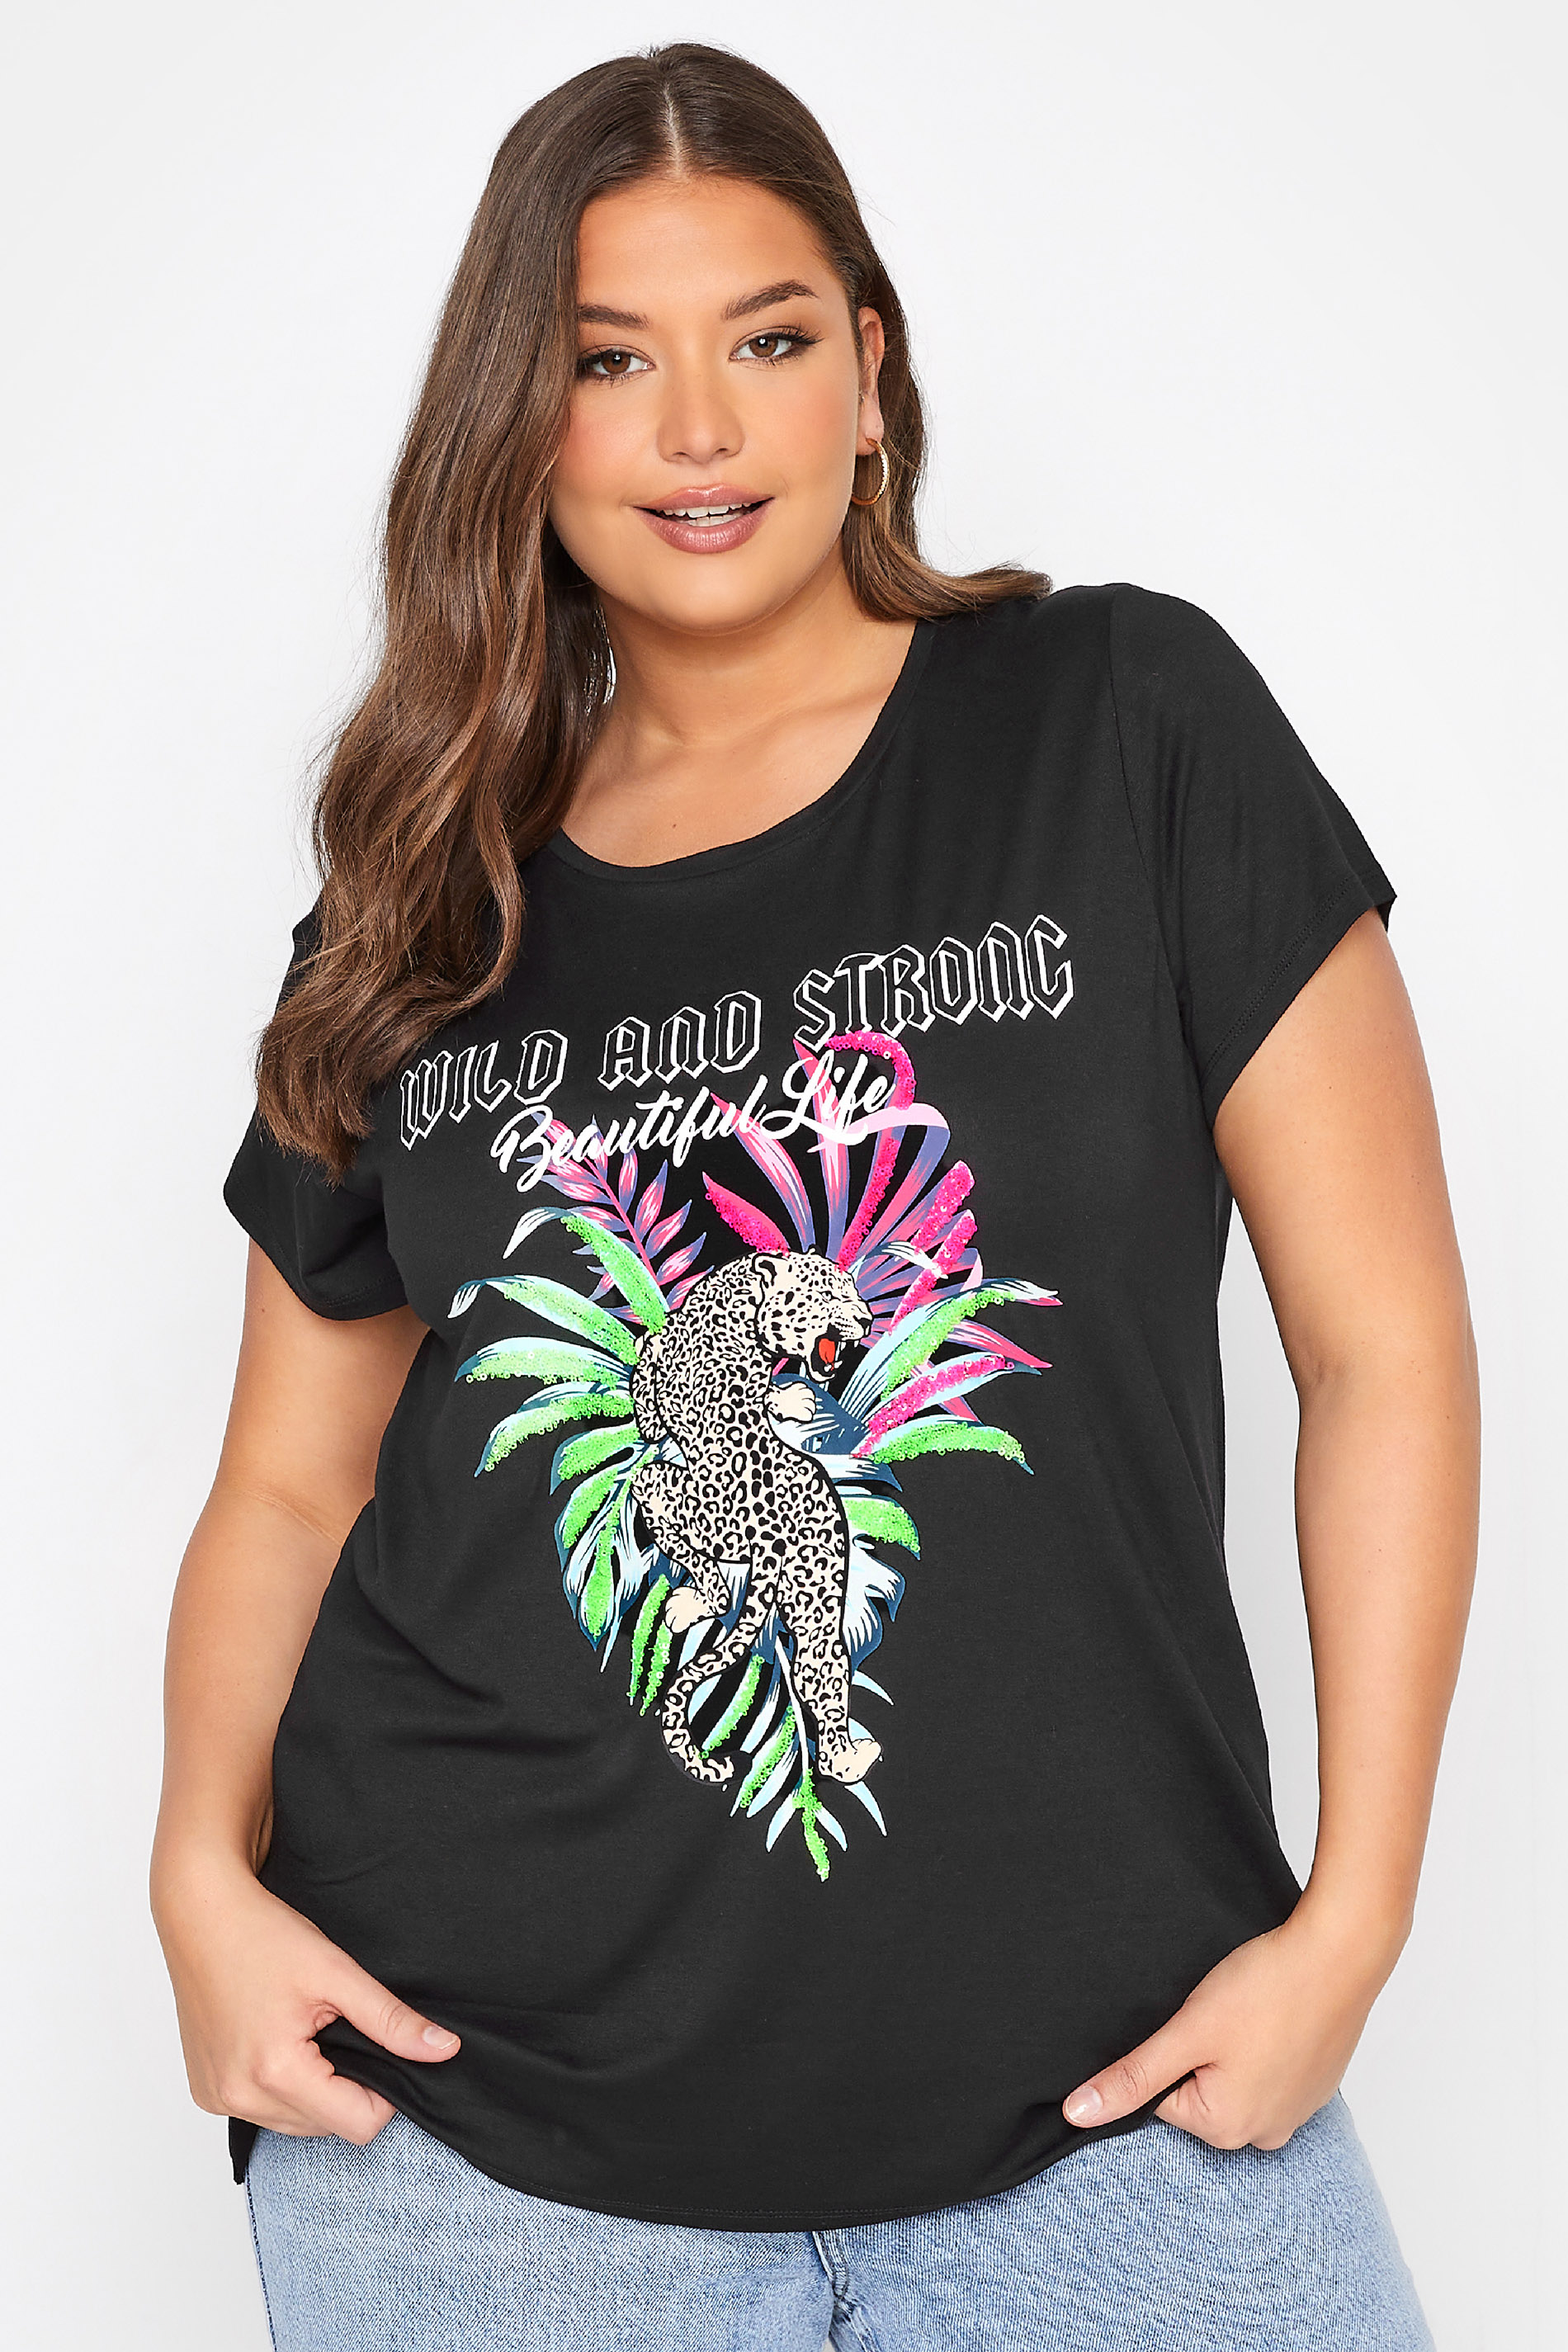 Grande taille  Tops Grande taille  T-Shirts | T-Shirt Noir en Jersey 'Wild and Strong' - TU98936